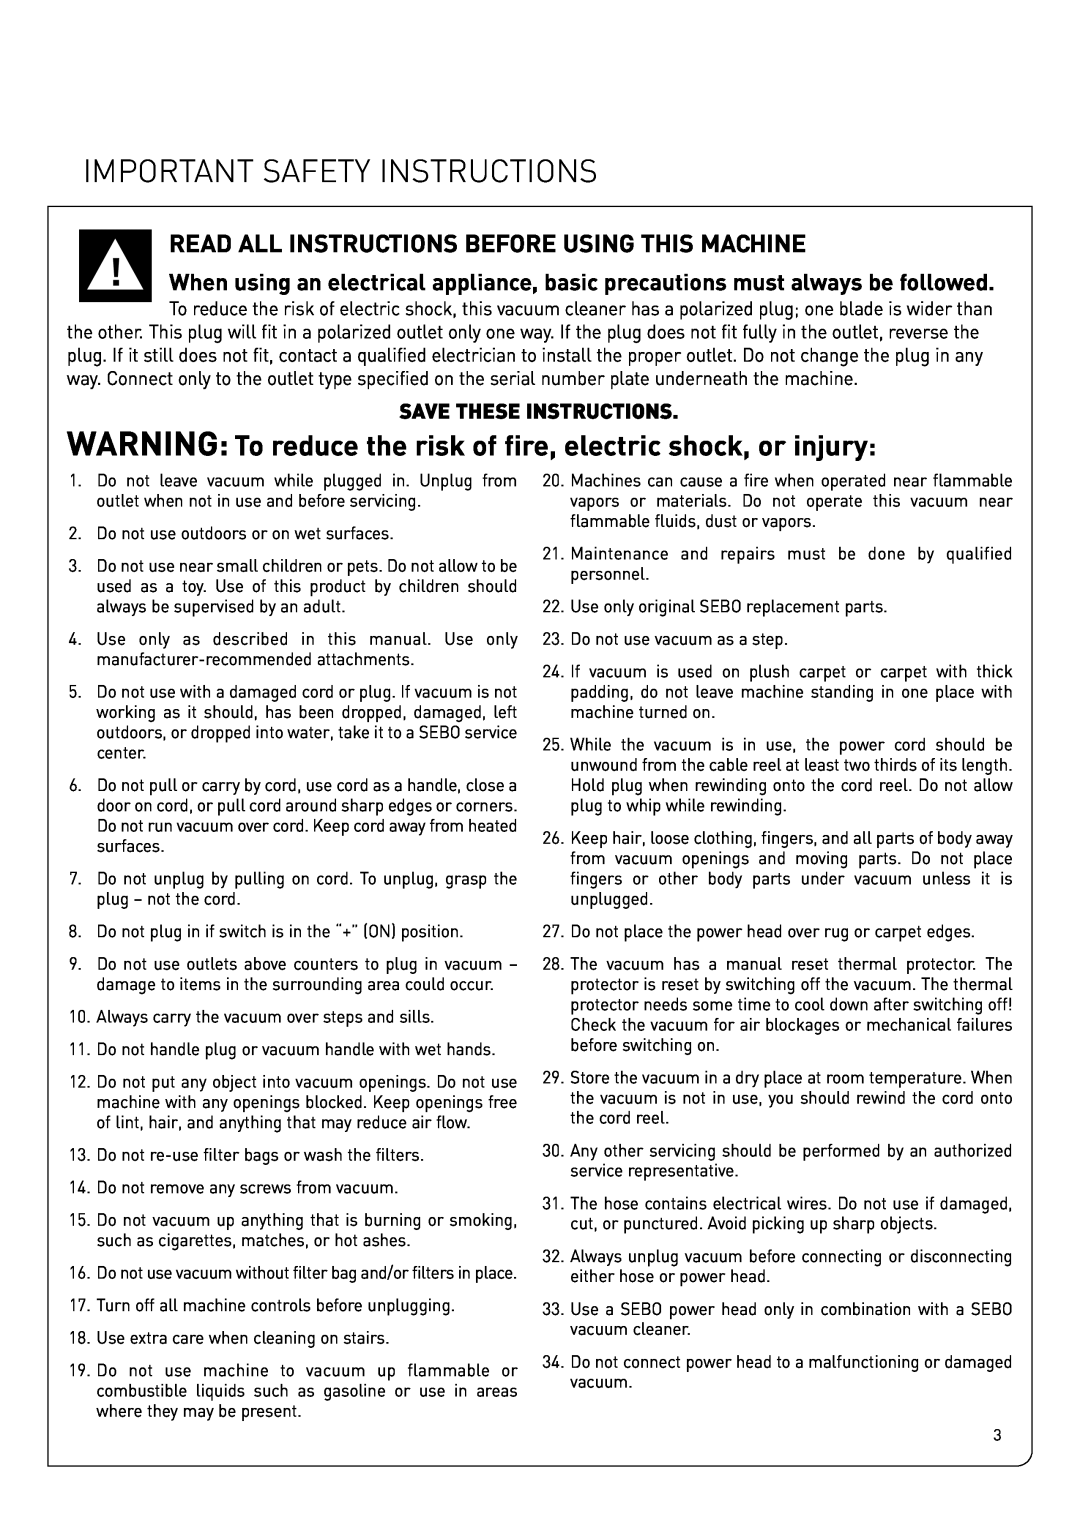 Sebo Airbelt D Important Safety Instructions, Read All Instructions Before Using This Machine, Save These Instructions 